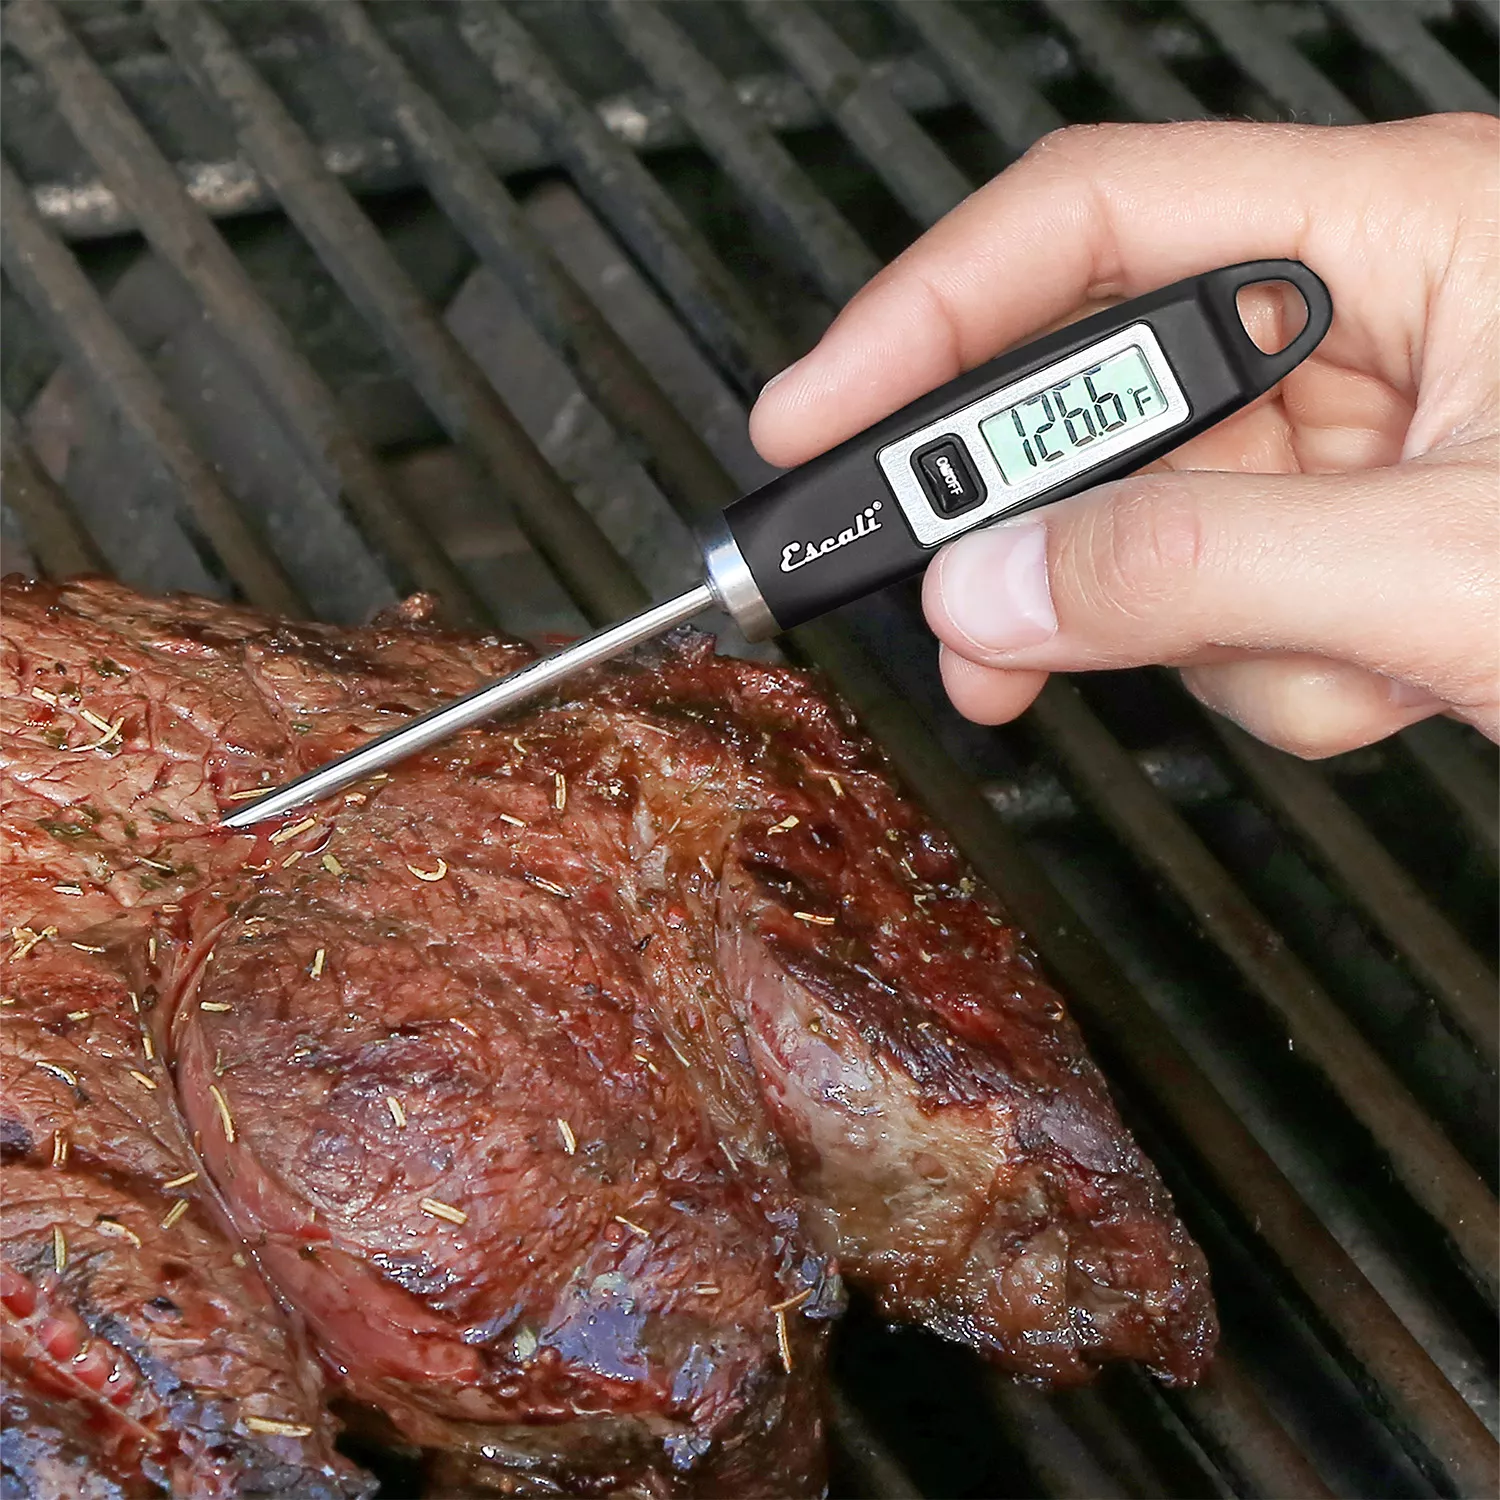 Meat Food Thermometer, Digital Candy Candle Thermometer, LCD, Cooking  Kitchen BBQ Grill Thermometer, Probe Instant Read Thermometer for Liquids  Pork